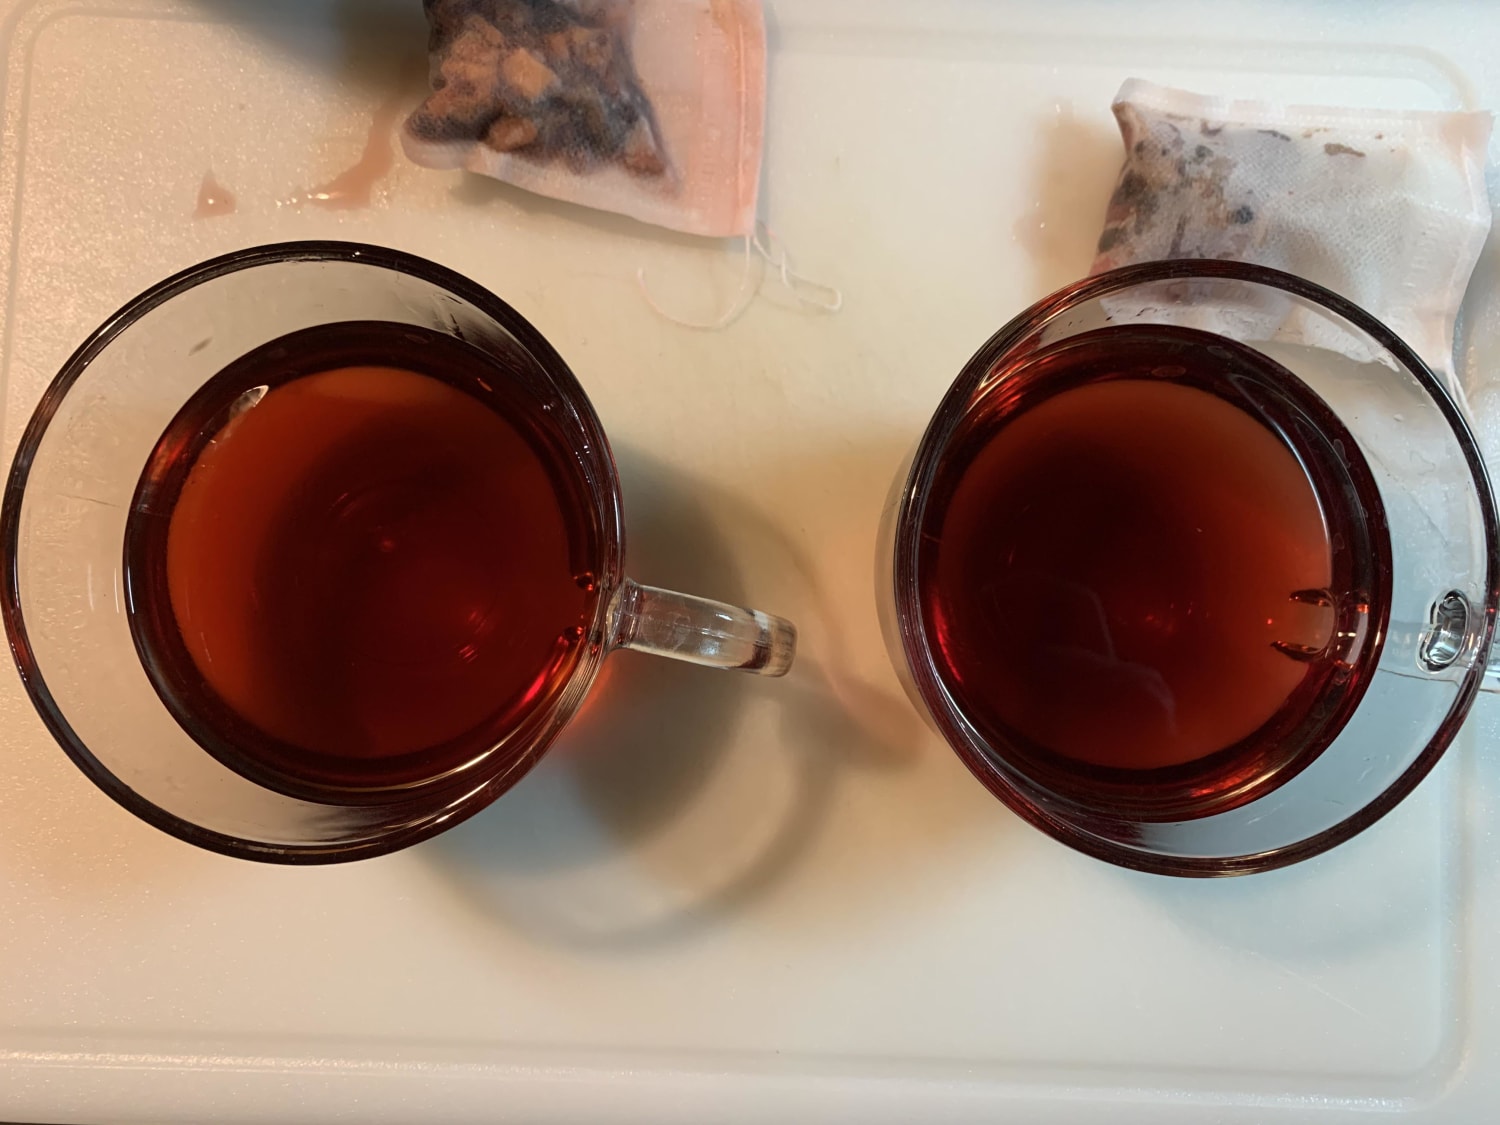 Retooling a tea flavor means trying different versions of it to get the ideal. Two different versions of a strawberry lemonade fruit tea. Taste testing is my favorite part of the day. 🤗 What tea are you having today?